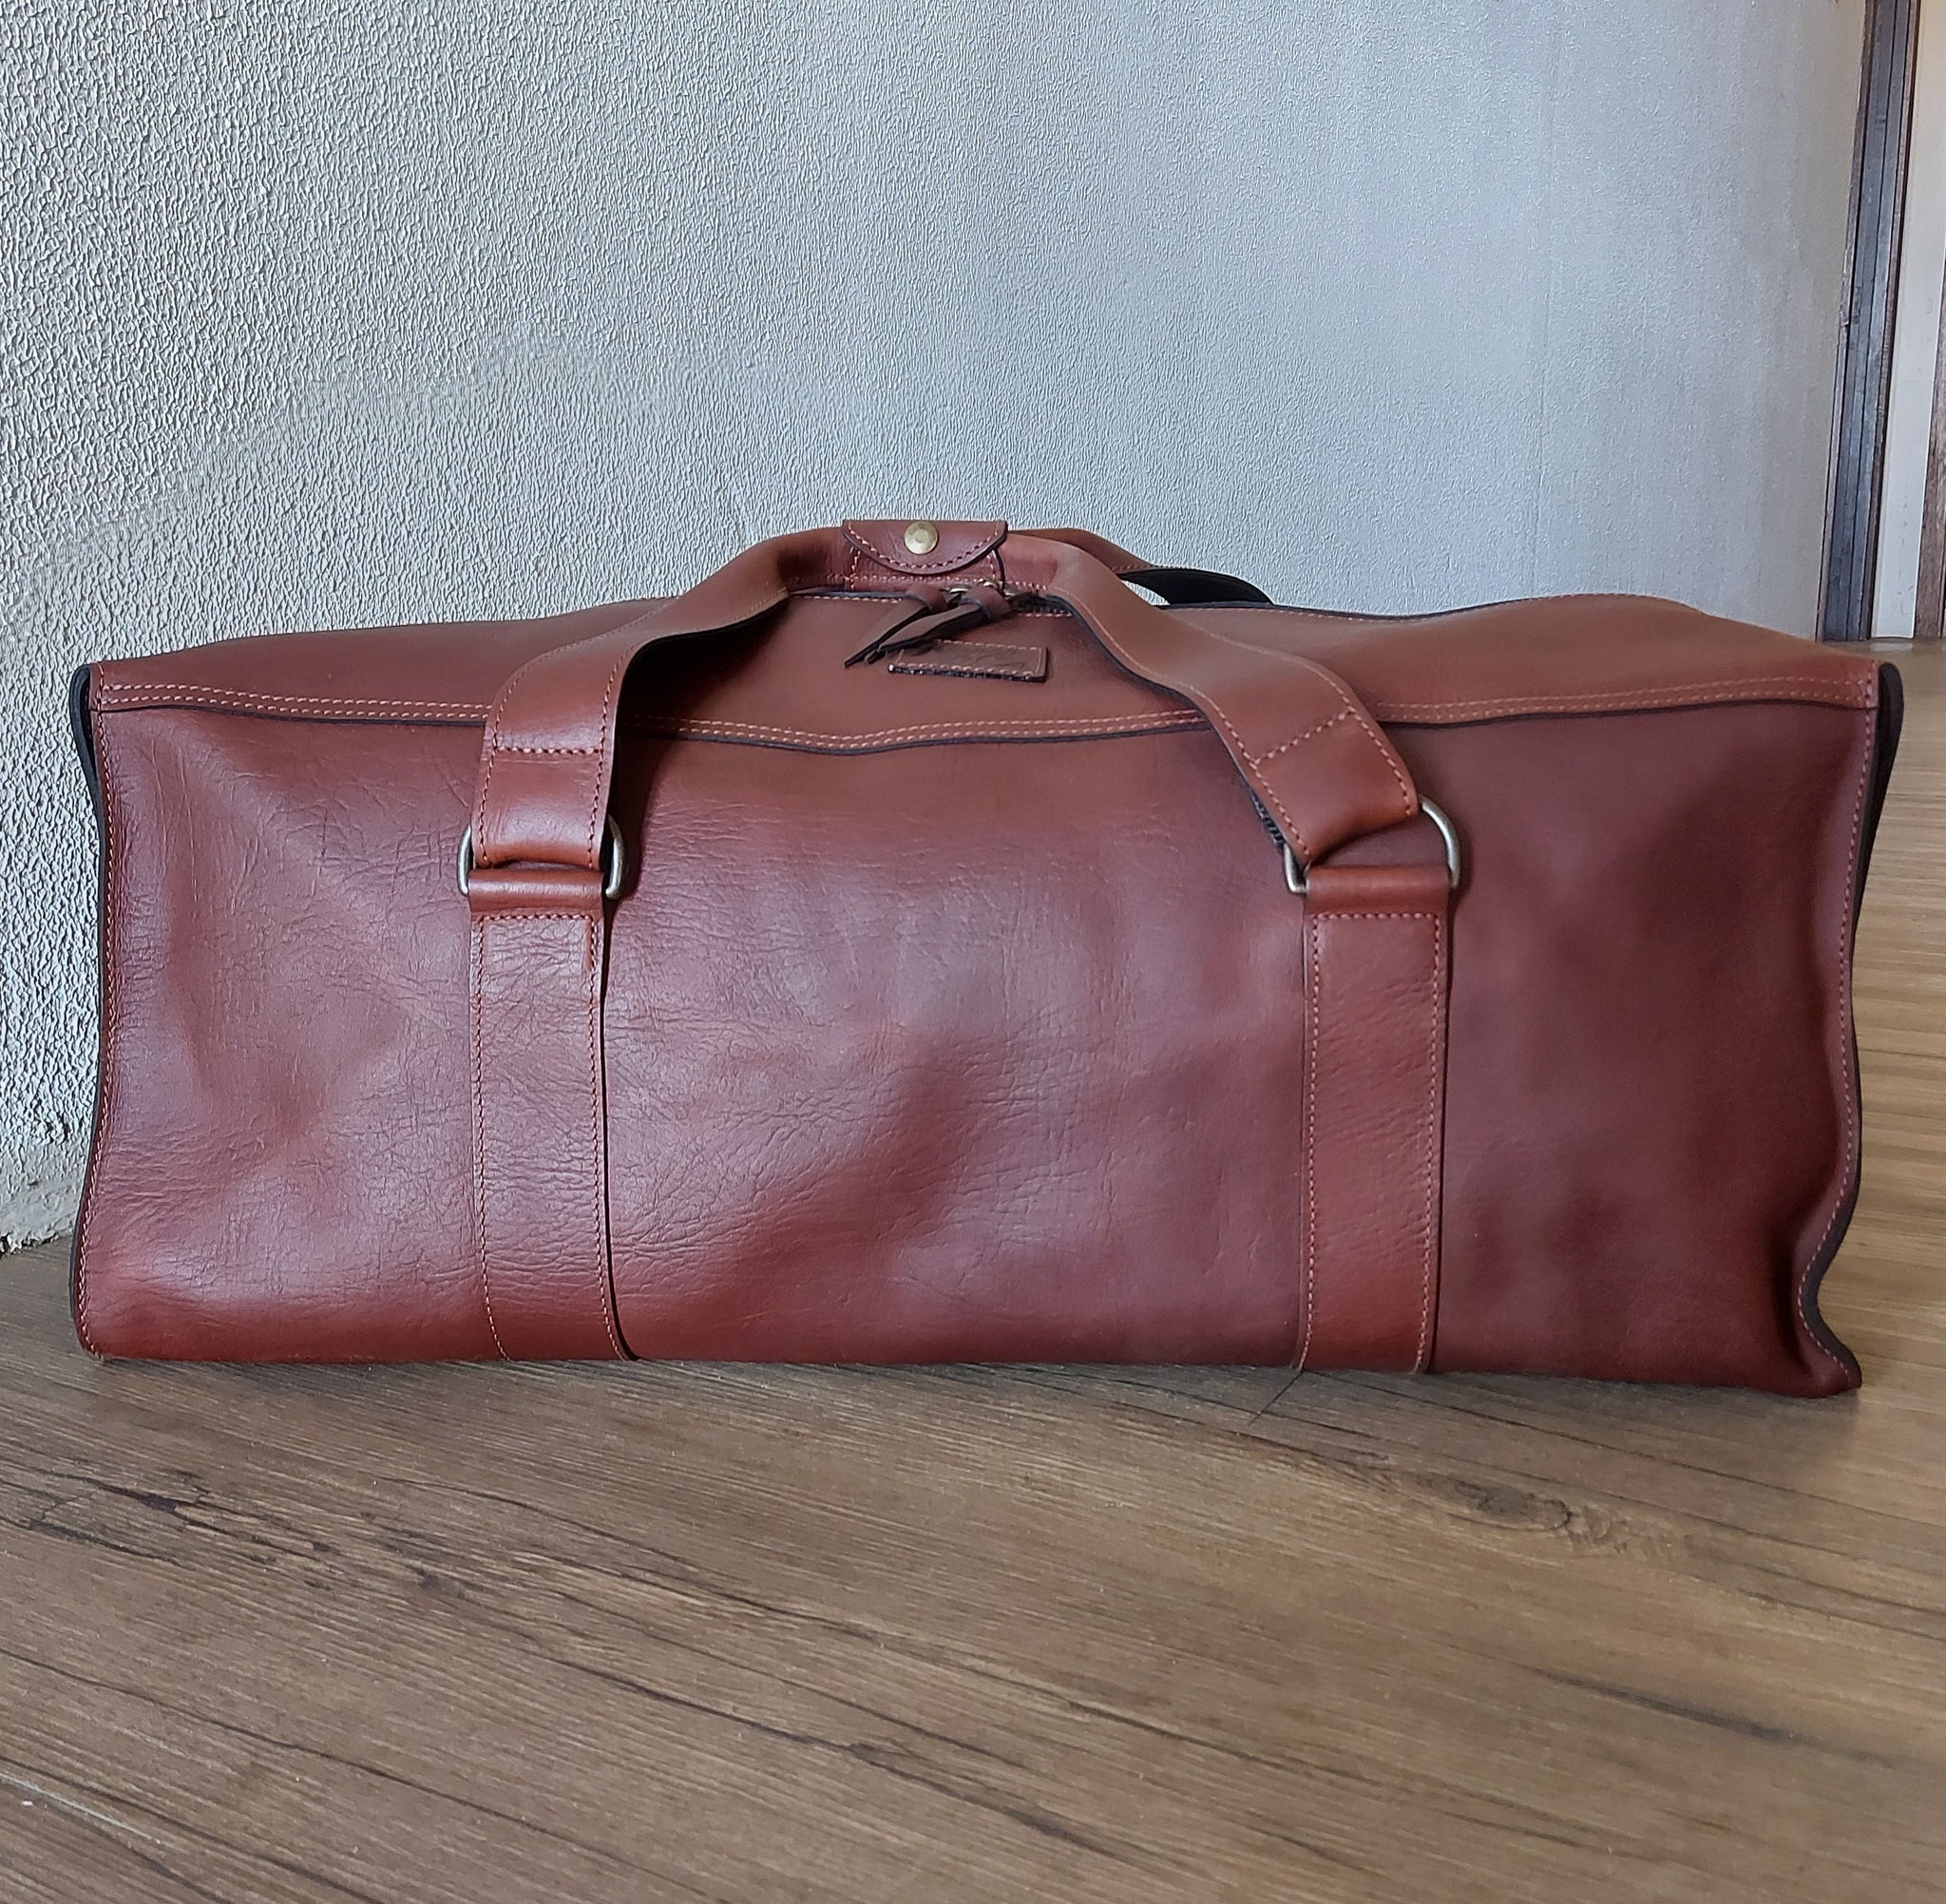 Kinnon and Co branded, tan leather large Family bag. 